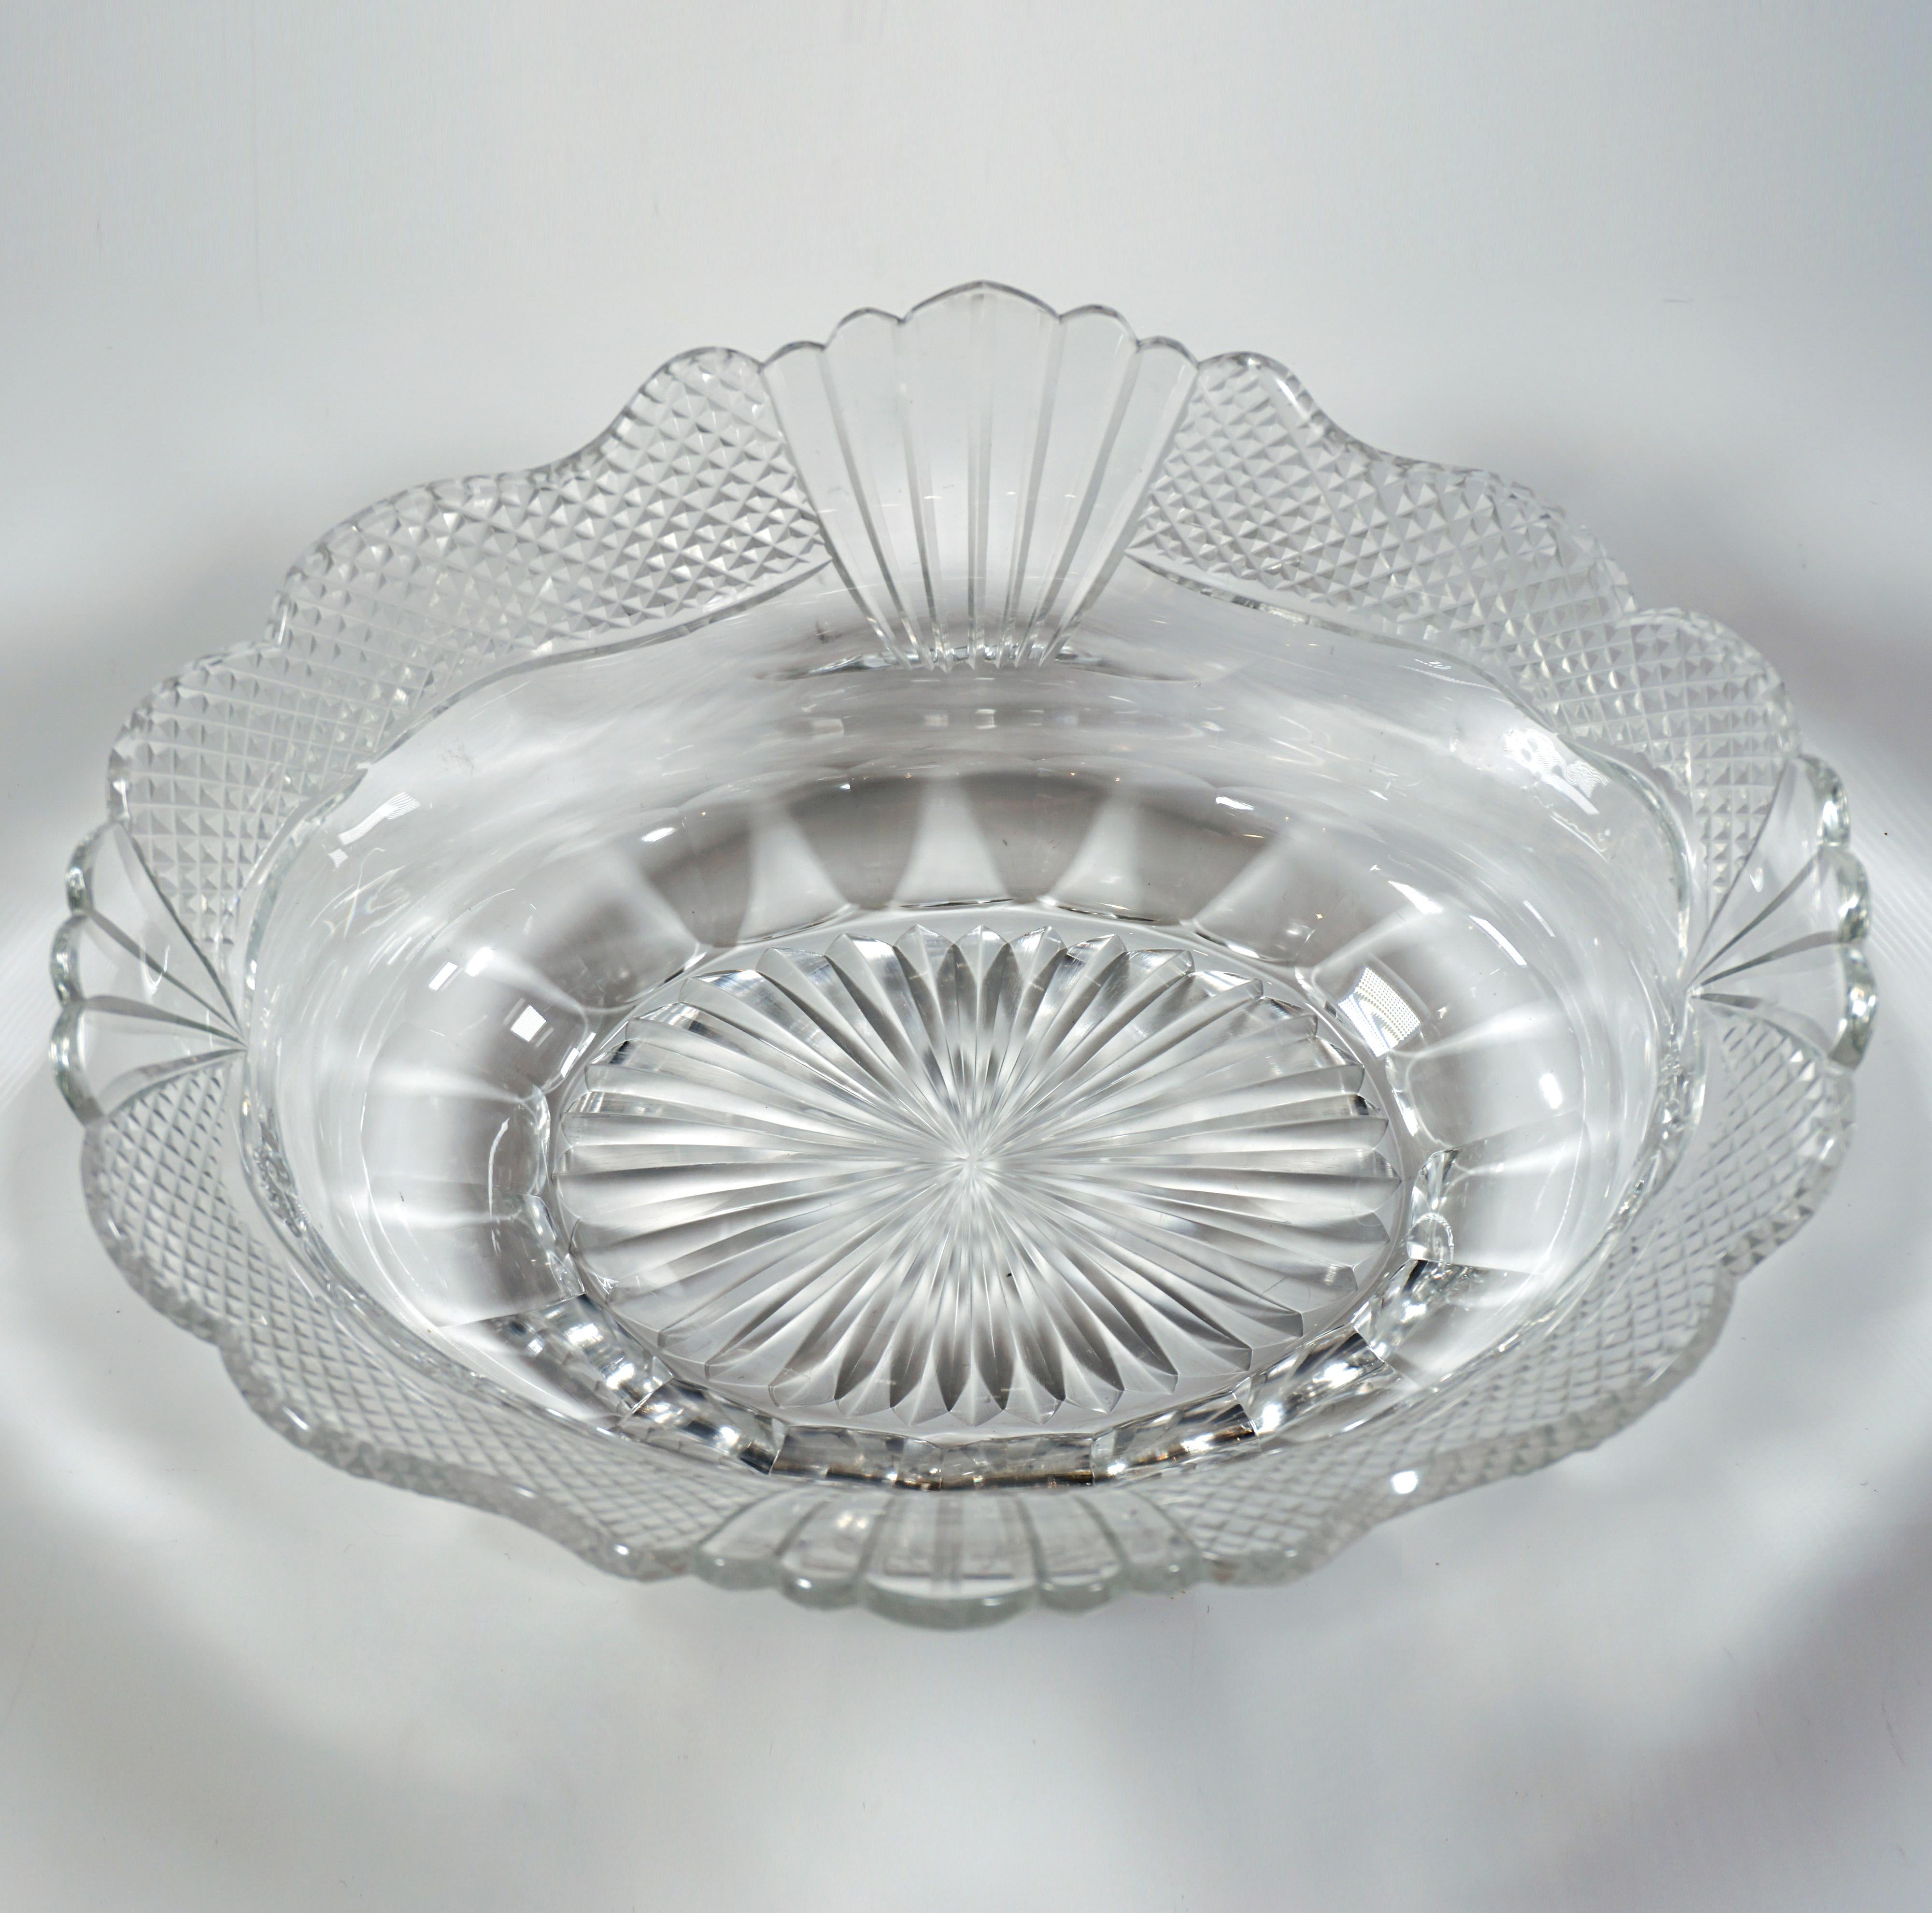 Silver Jardiniere With Artfully Cut Glass Insert, Wilkens & Sons Germany, 1894 In Good Condition For Sale In Vienna, AT